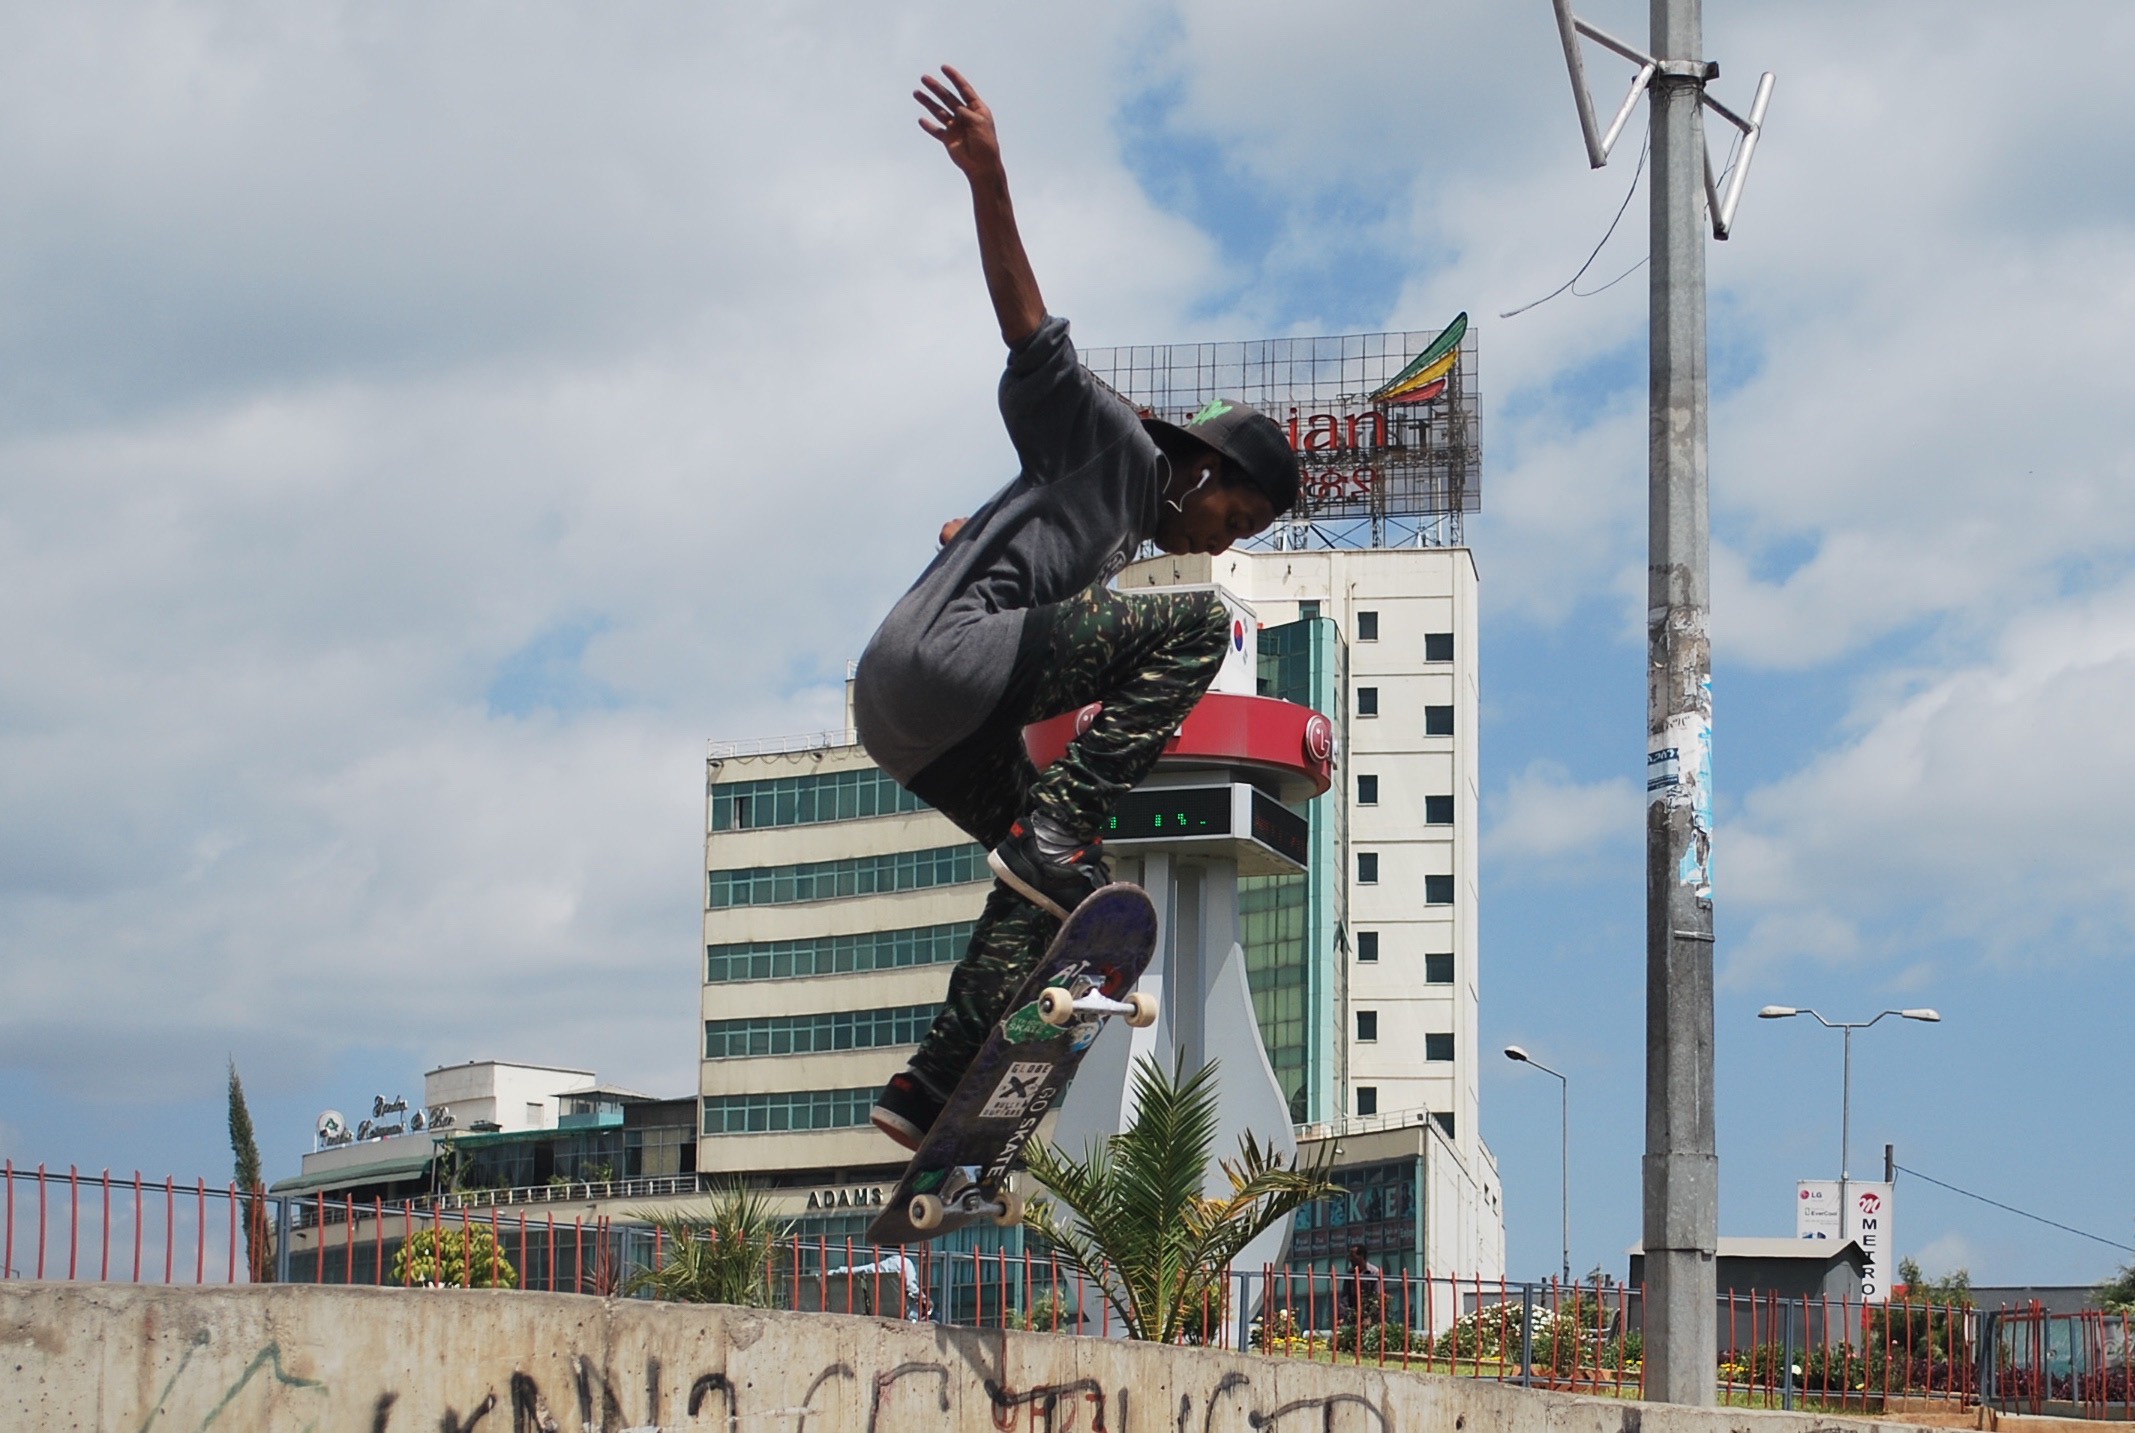 A skateboarder in Addis Ababa.